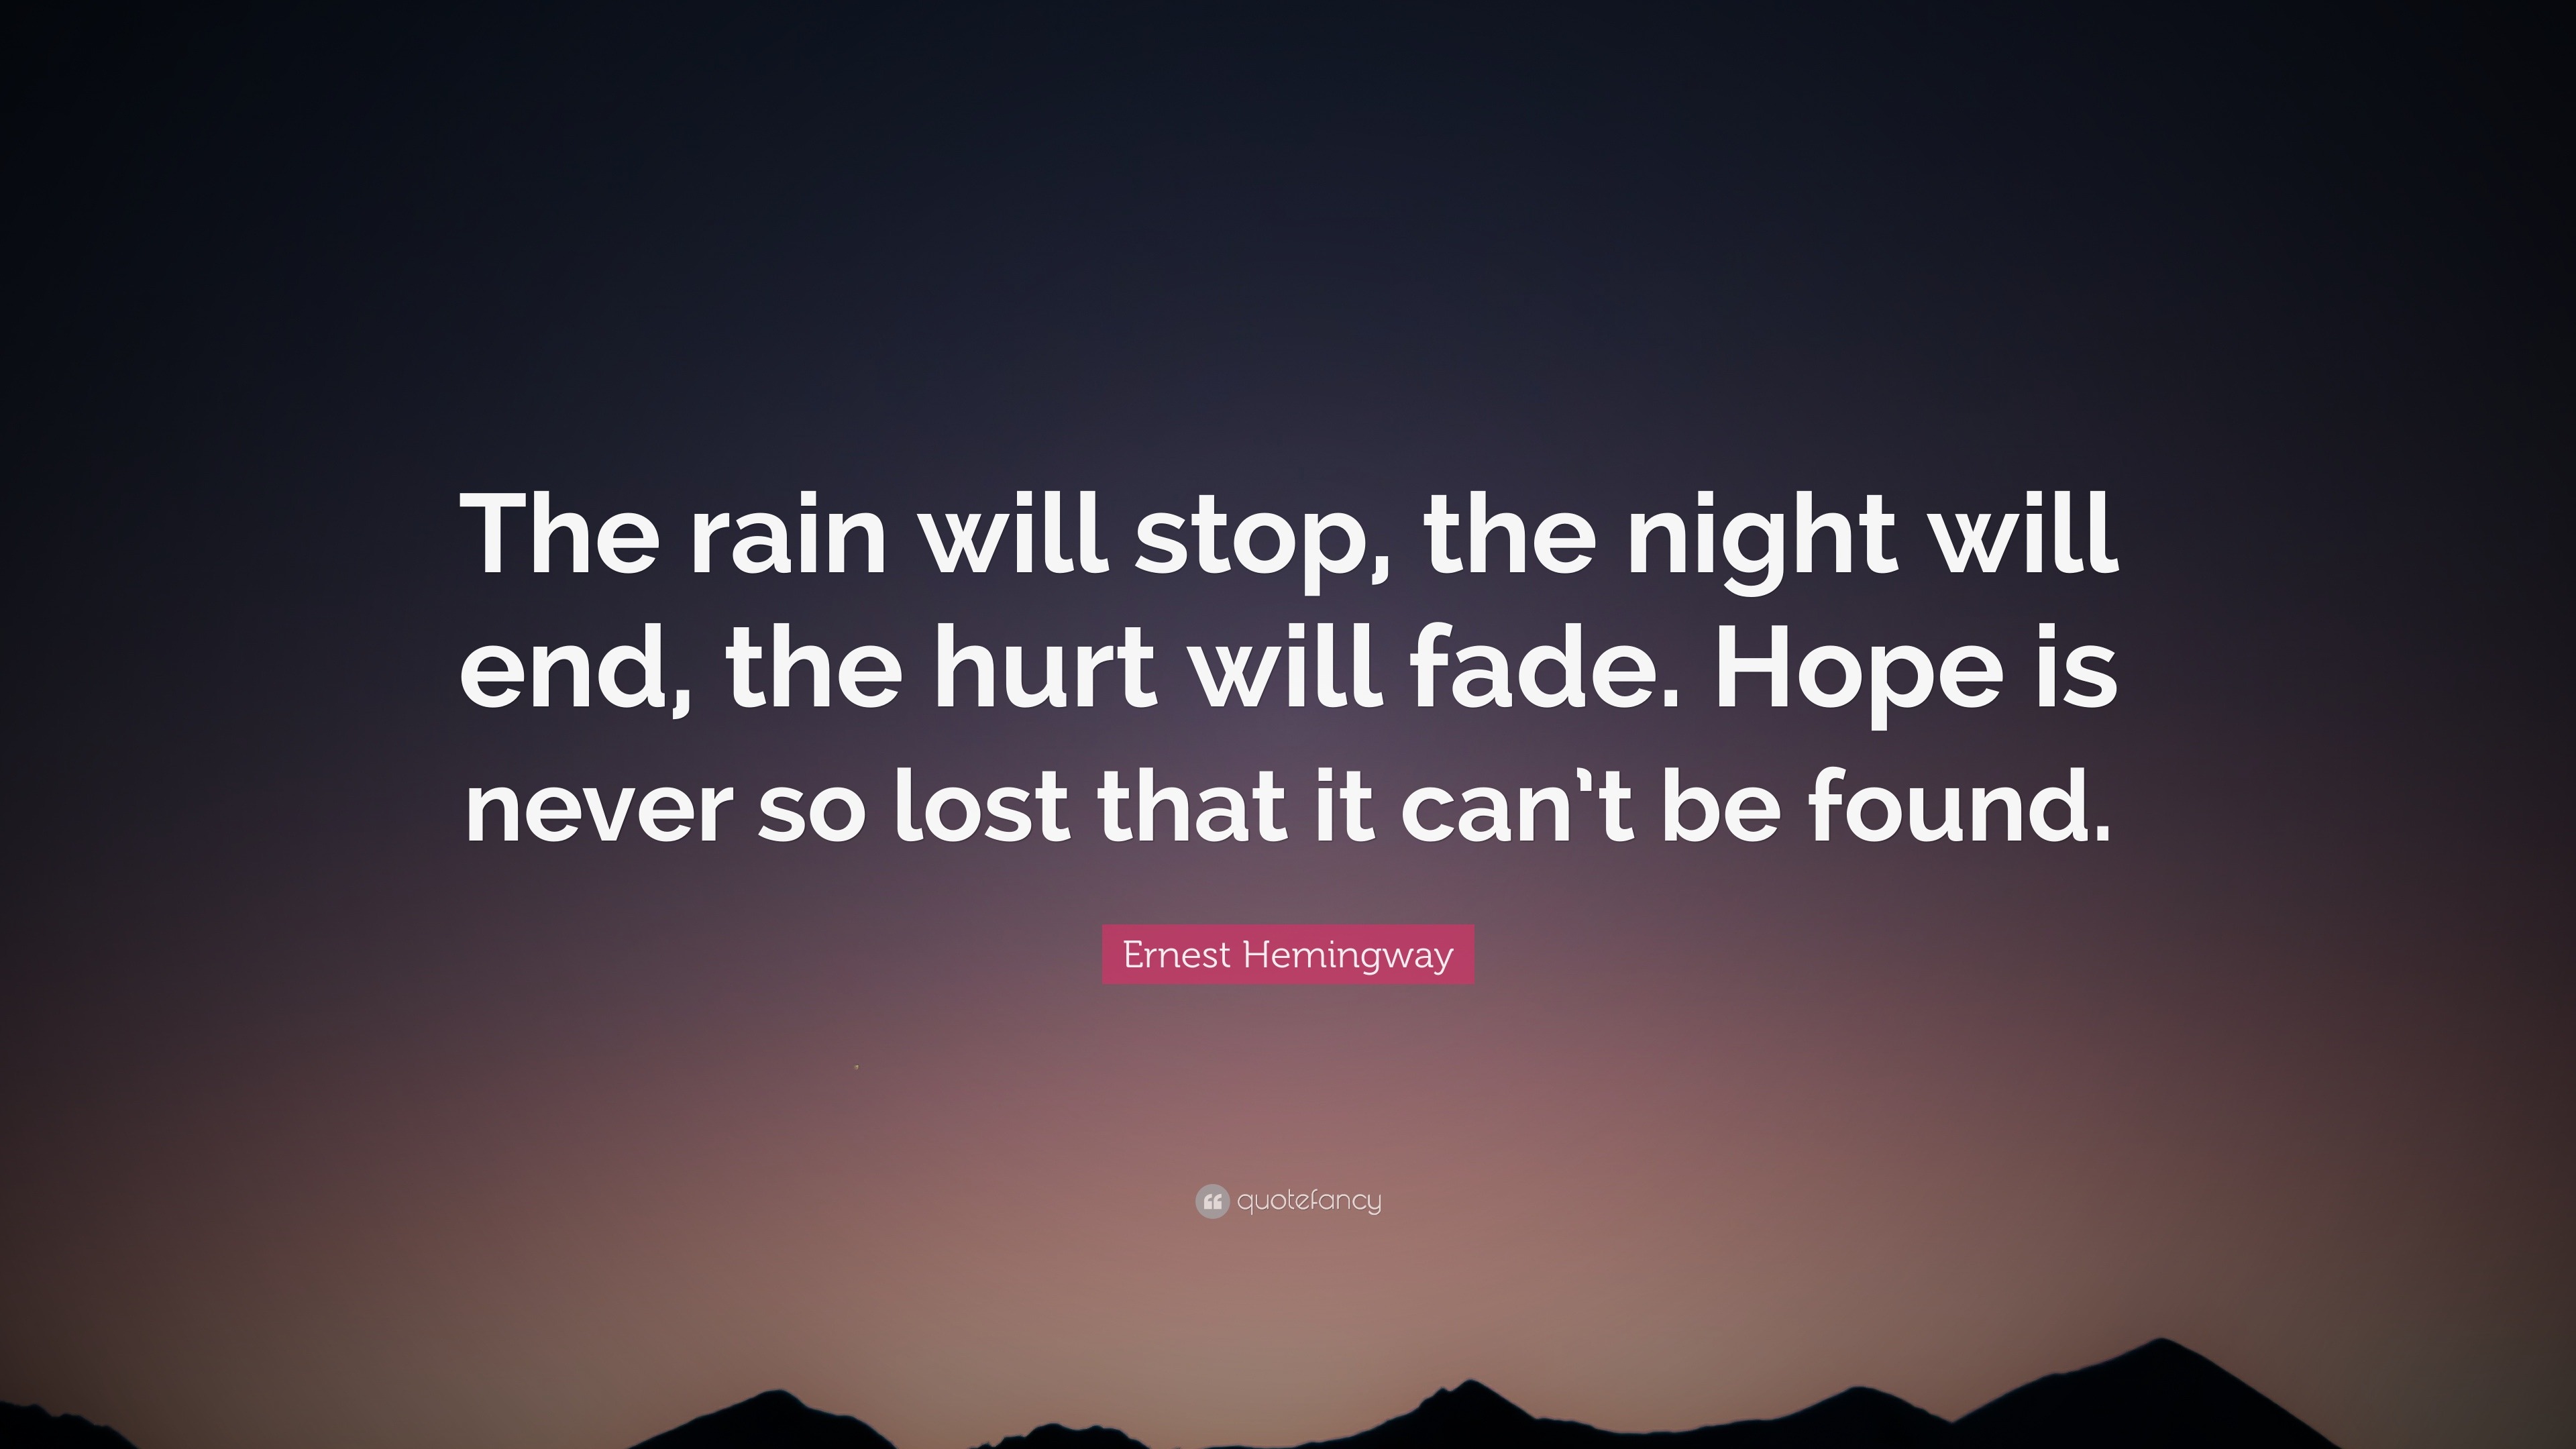 Ernest Hemingway Quote: “The rain will stop, the night will end, the ...